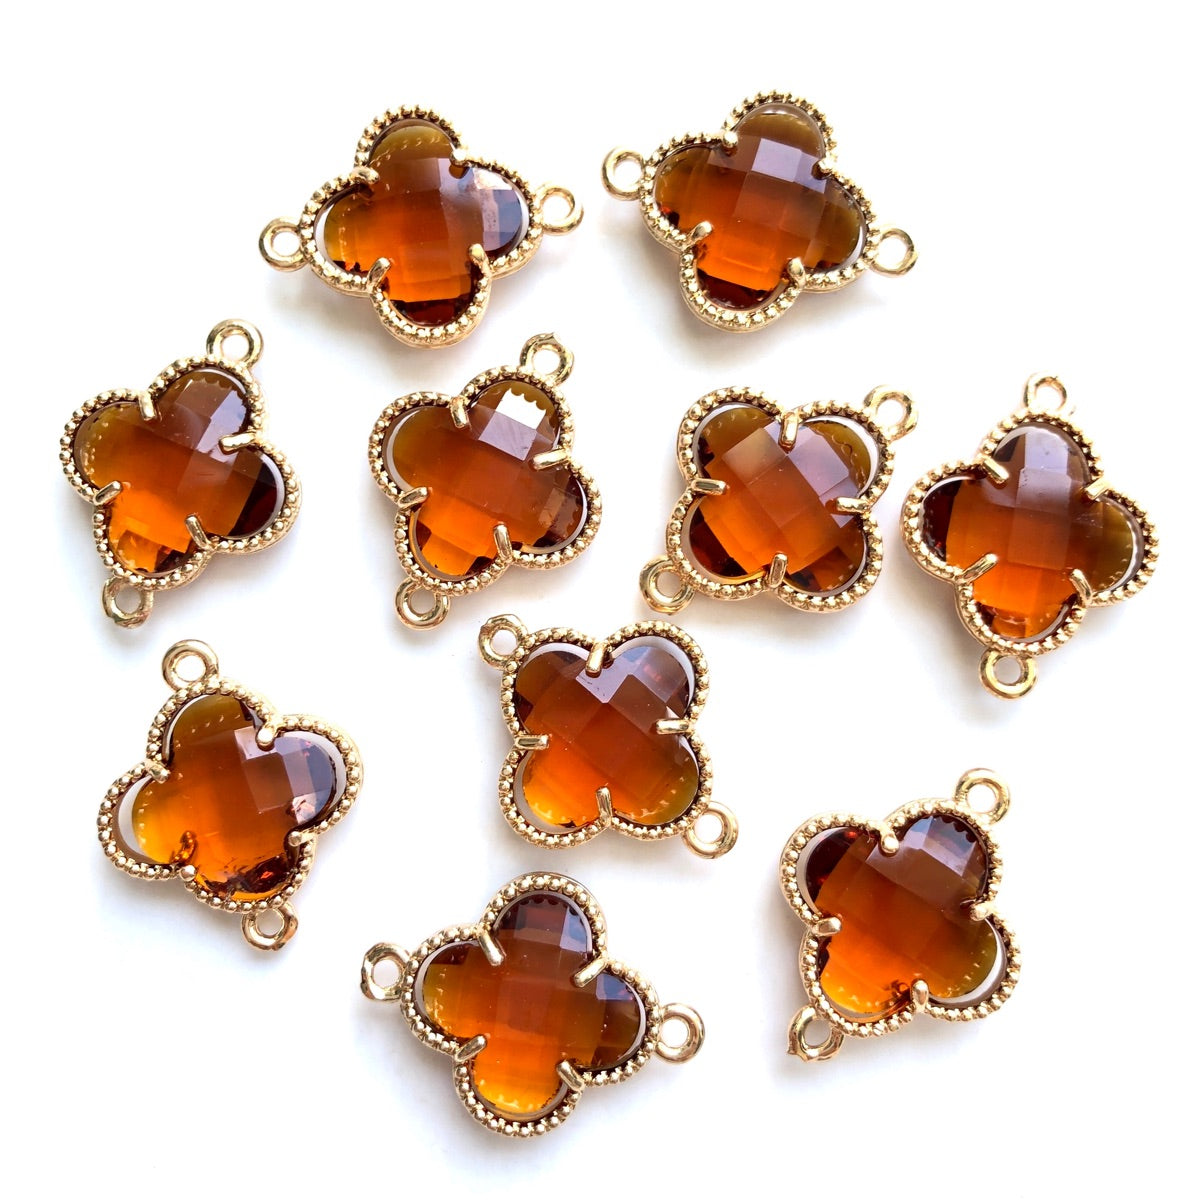 10pcs/Lot Gold Plated Glass Crystal Clover Flower Connectors Brown Stone Charms Flower Glass Beads New Charms Arrivals Charms Beads Beyond